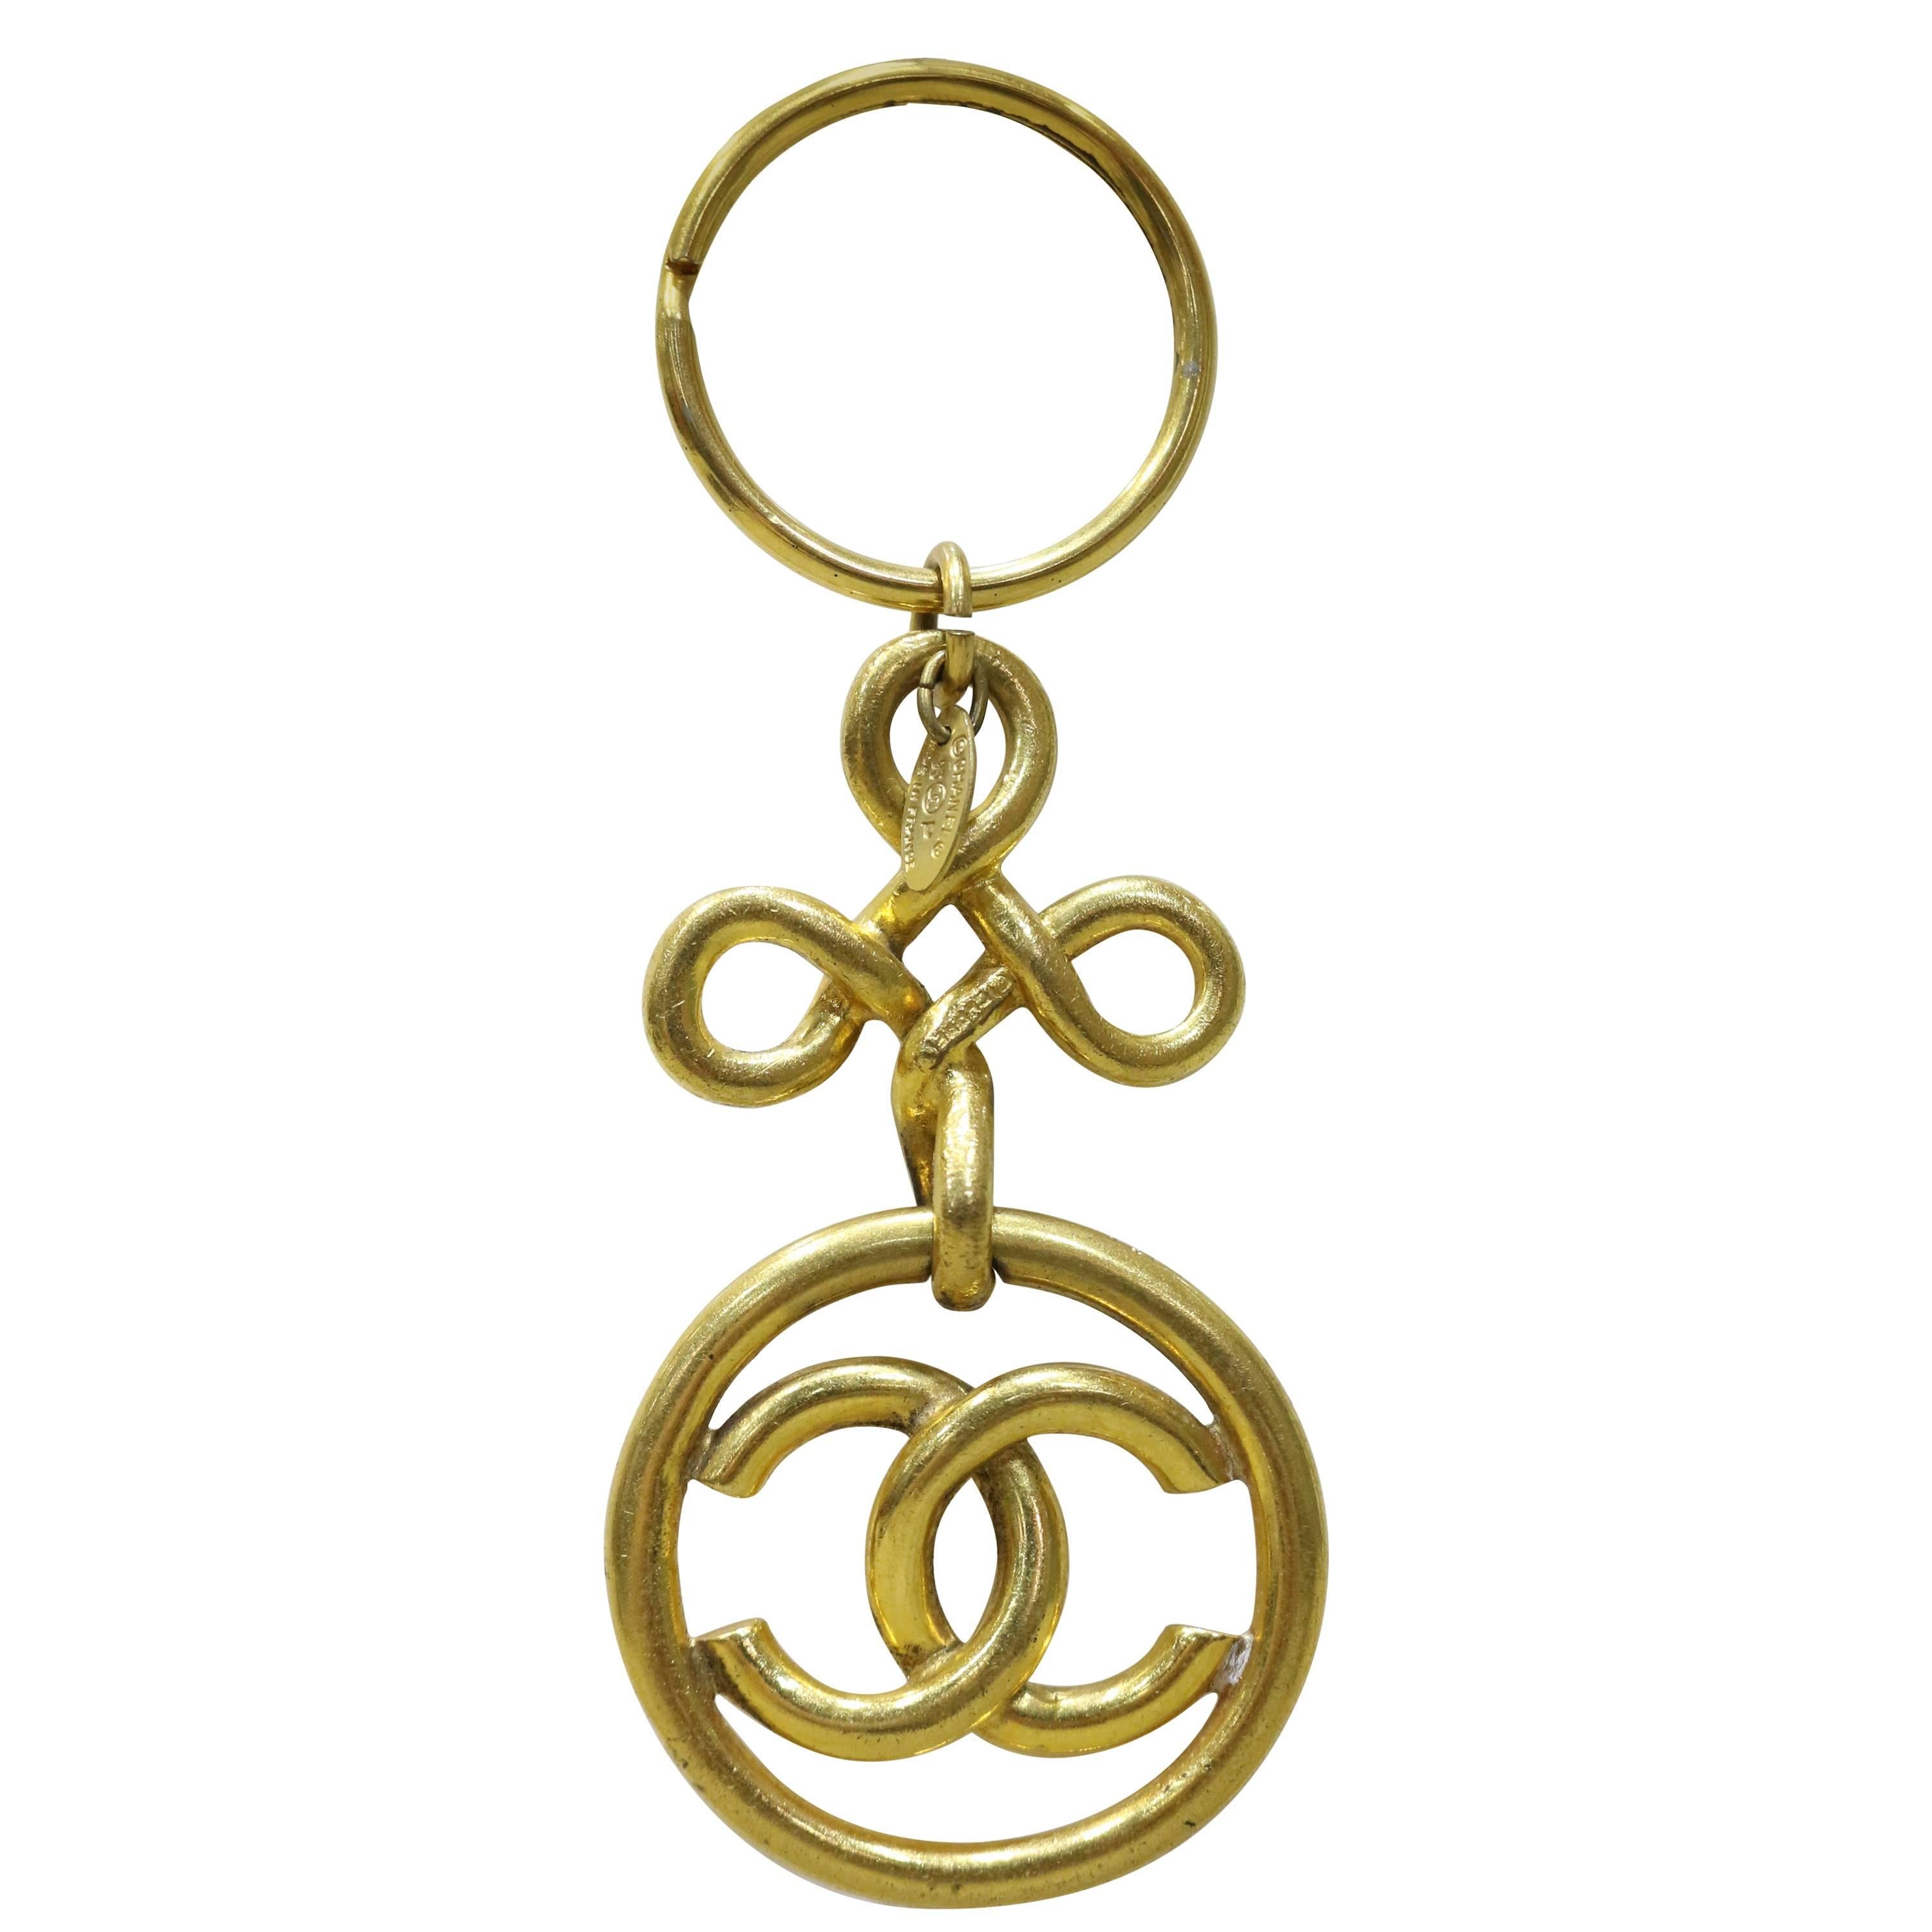 Chanel Gold Toned "CC" Key Ring 